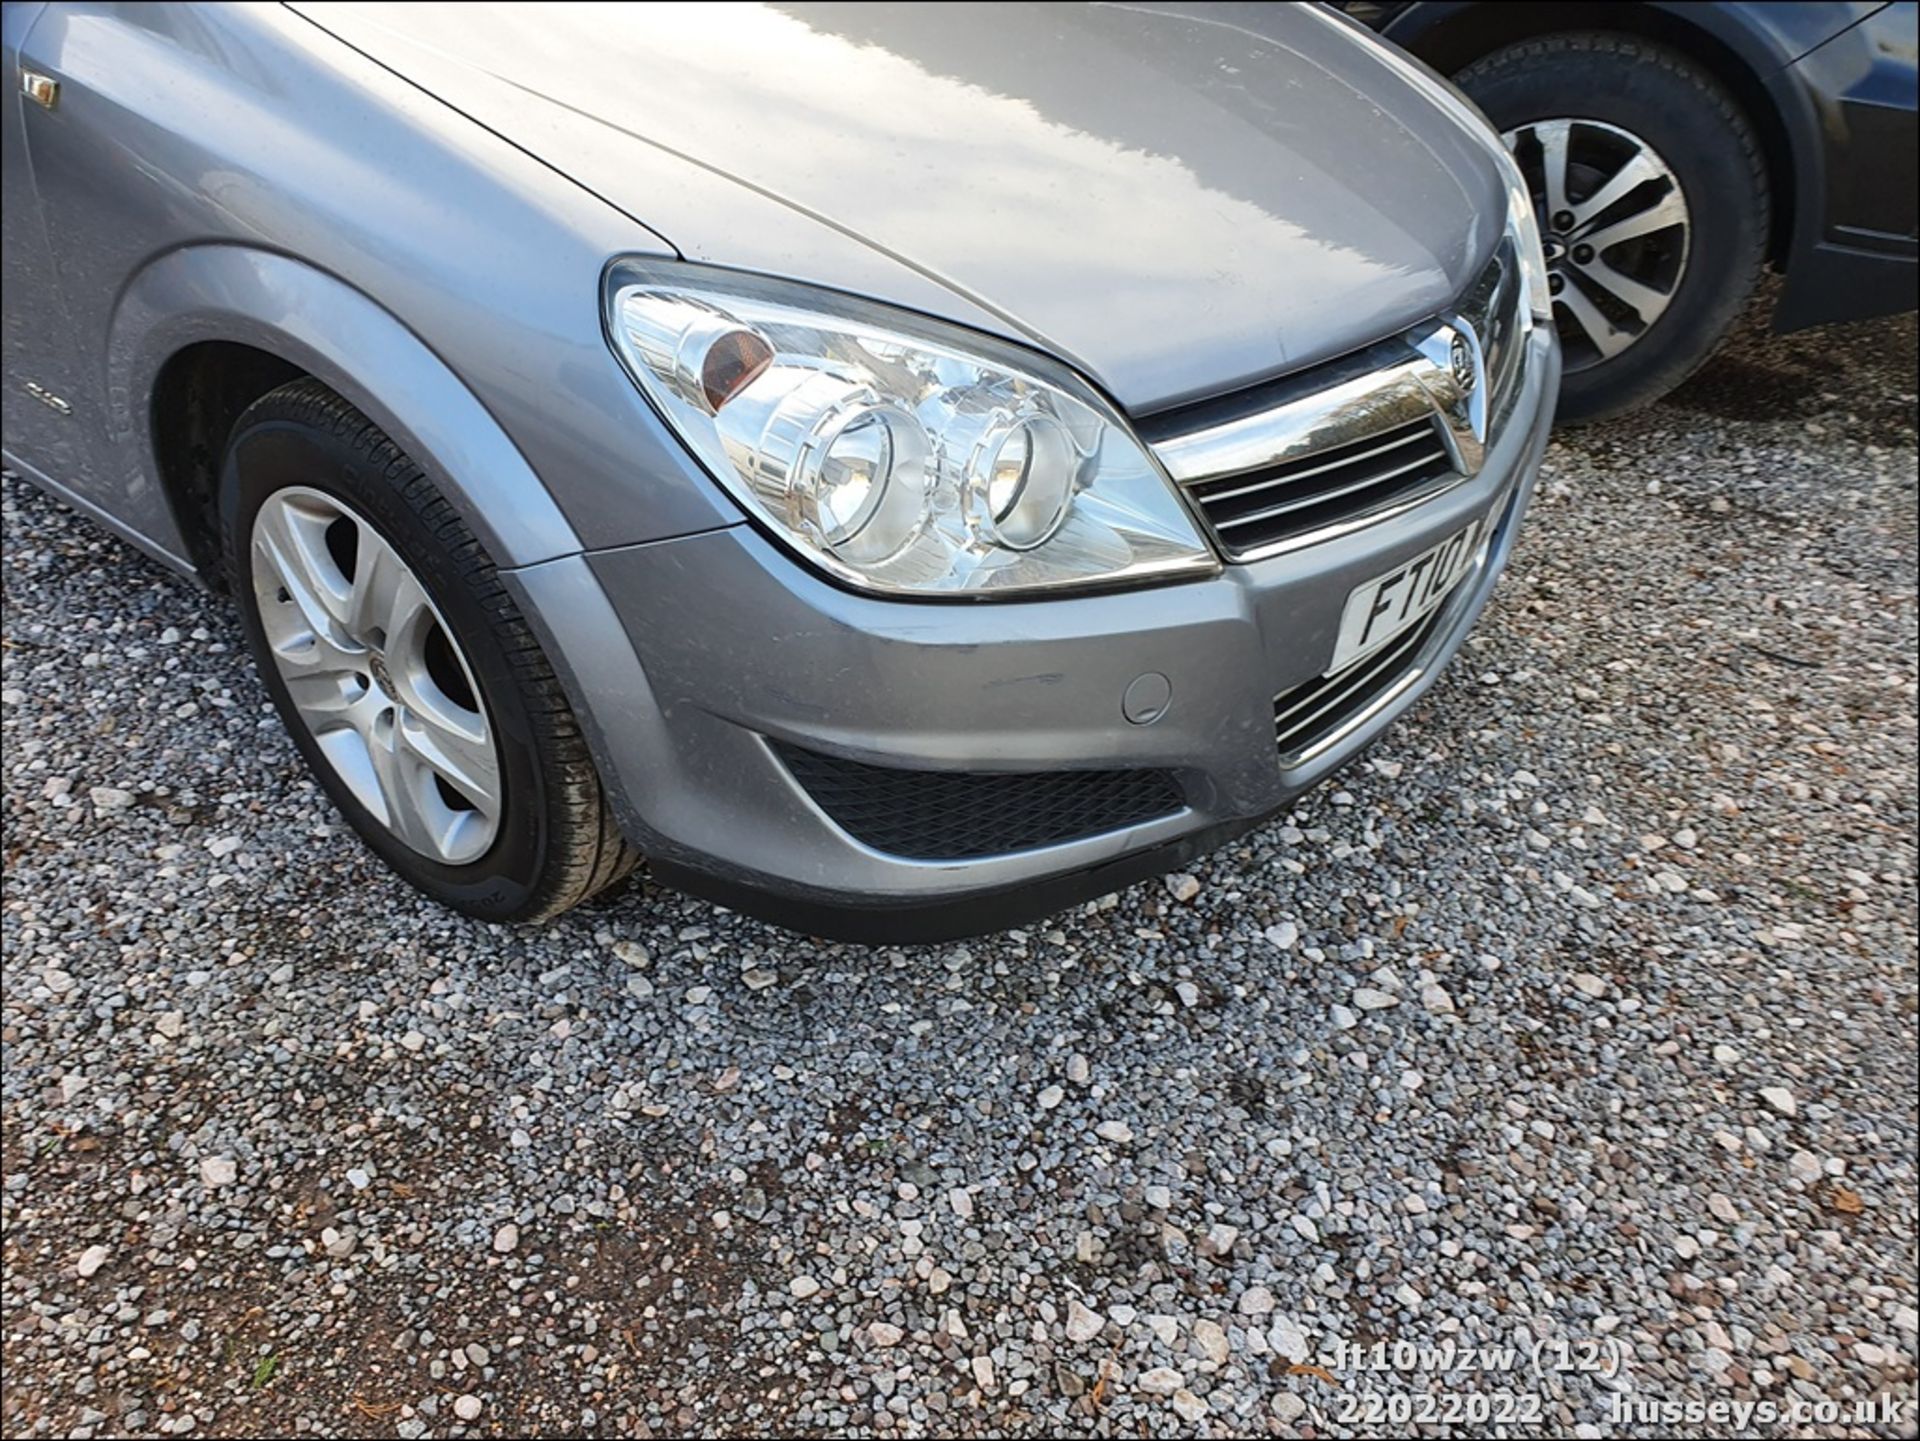 10/10 VAUXHALL ASTRA CLUB - 1364cc 5dr Hatchback (Silver) - Image 13 of 29